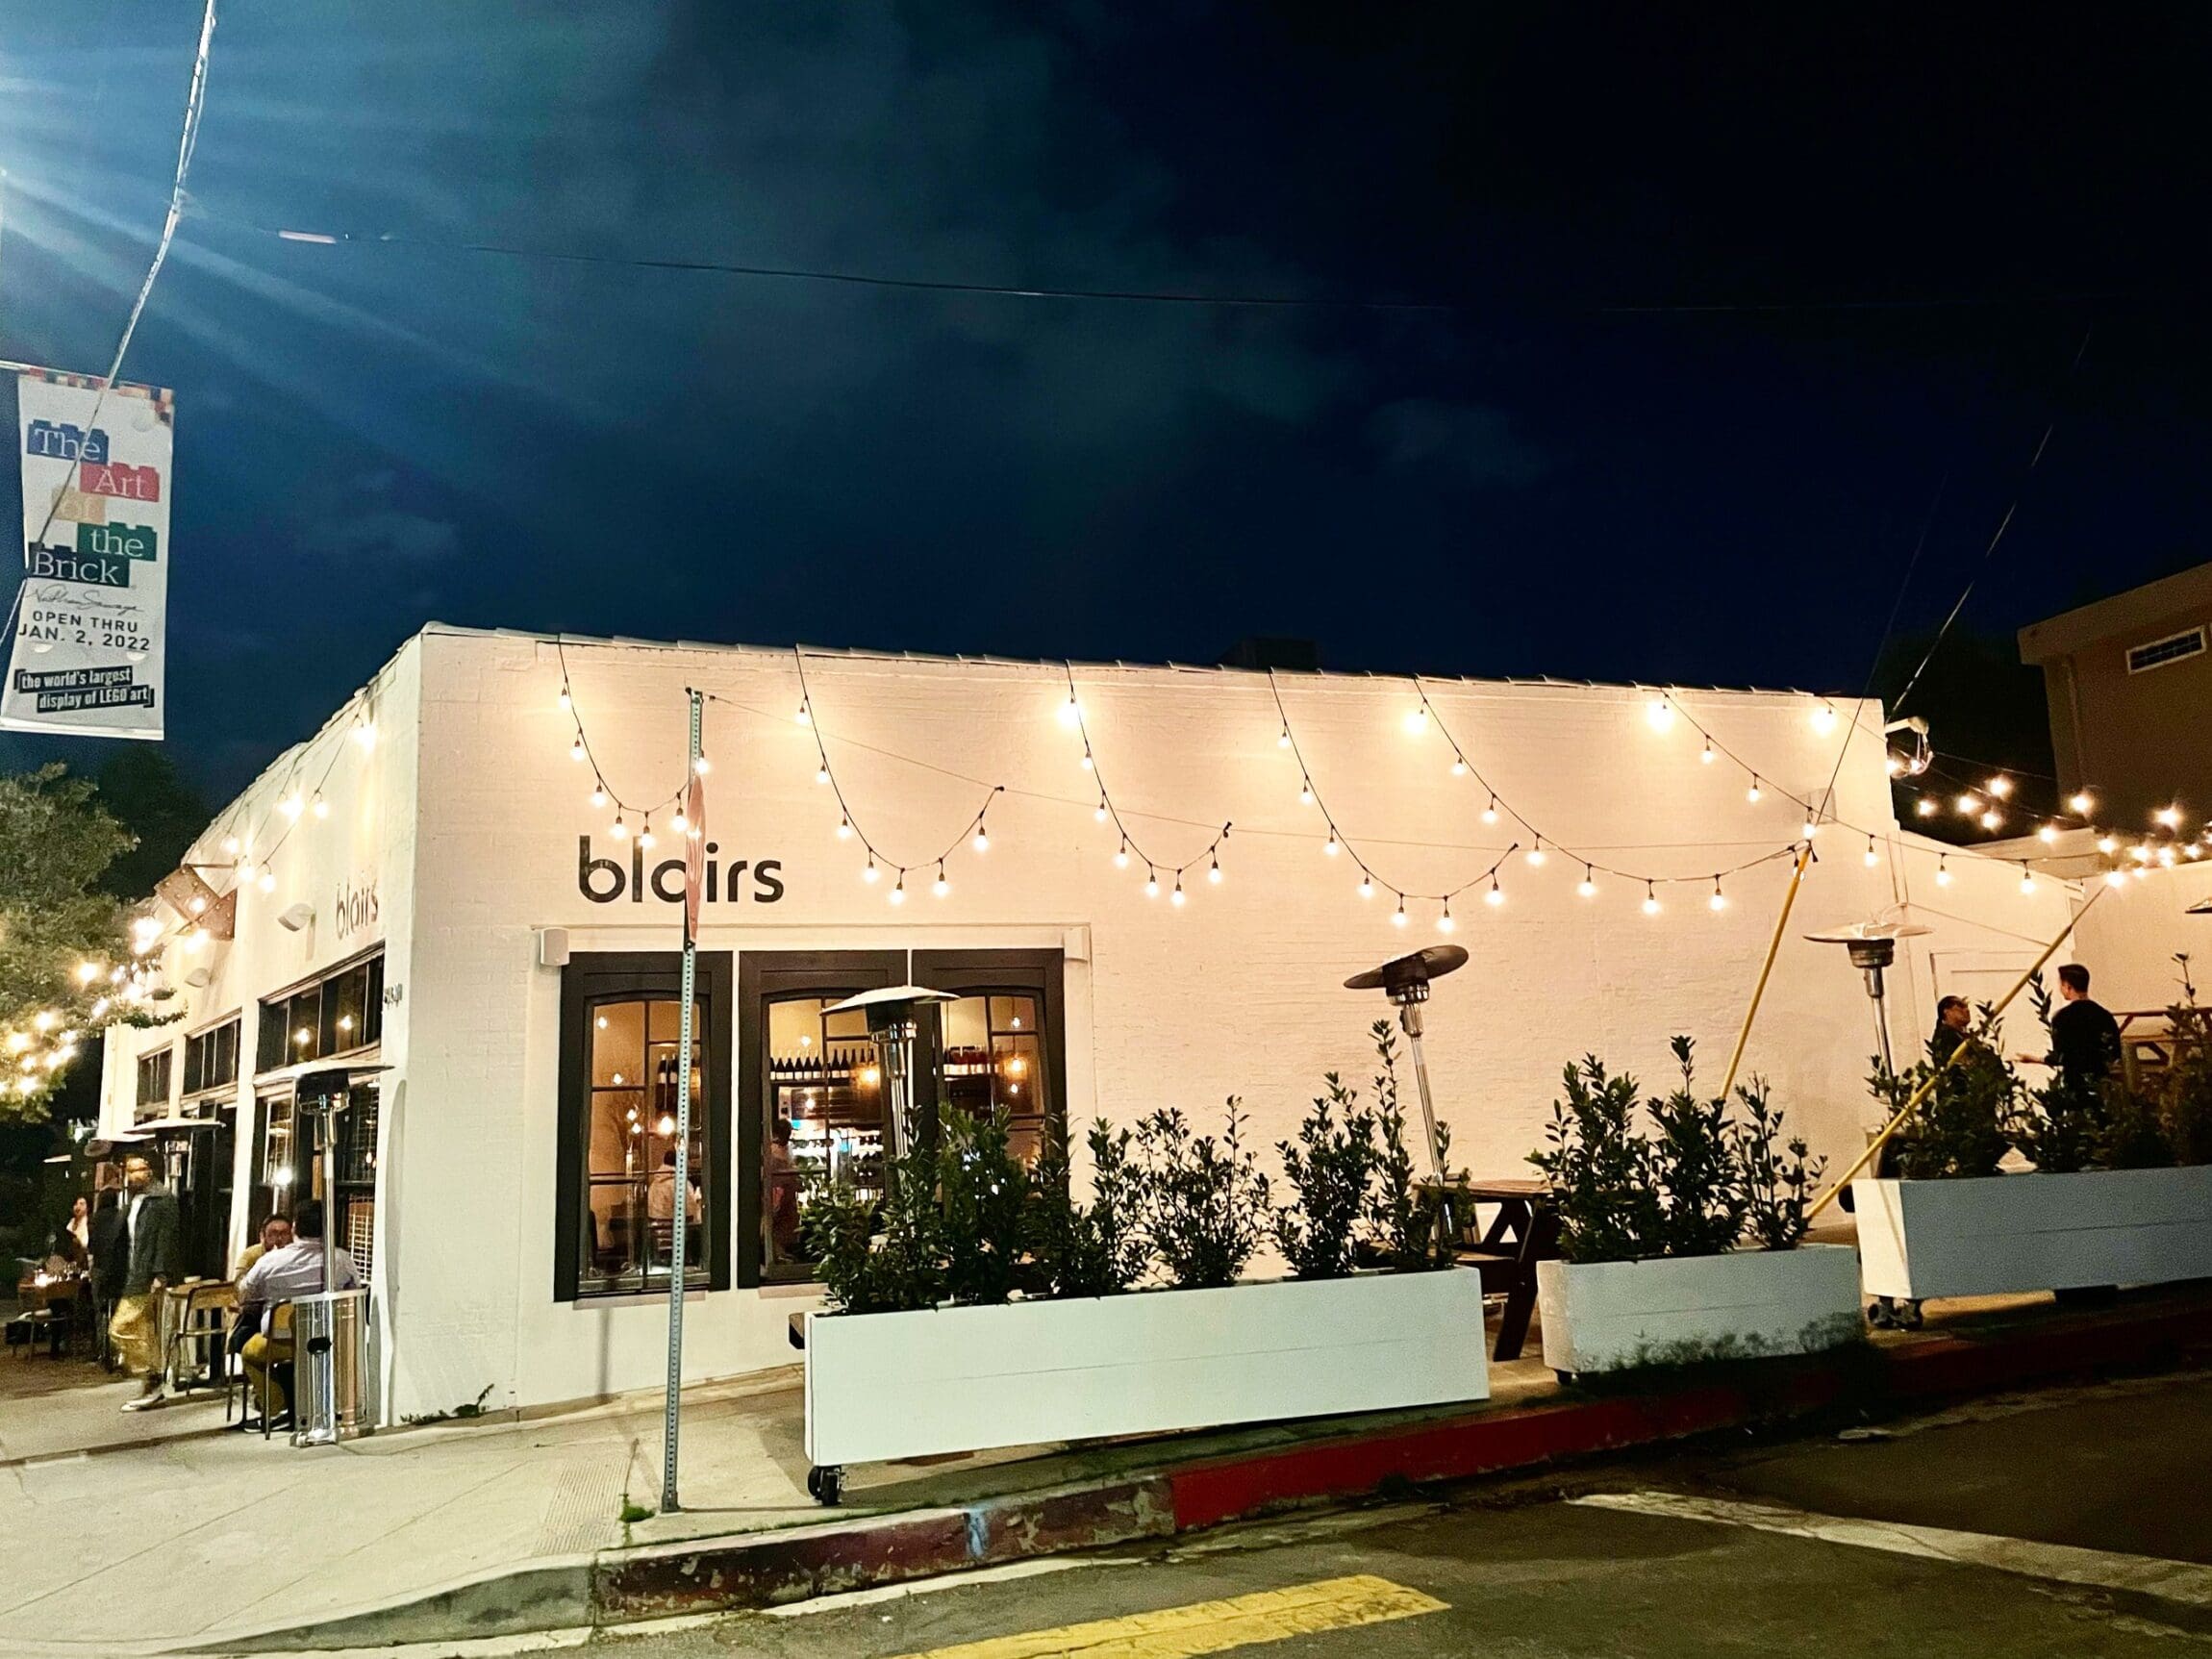 The best restaurants in Silver Lake | Blair's white-brick exterior at night